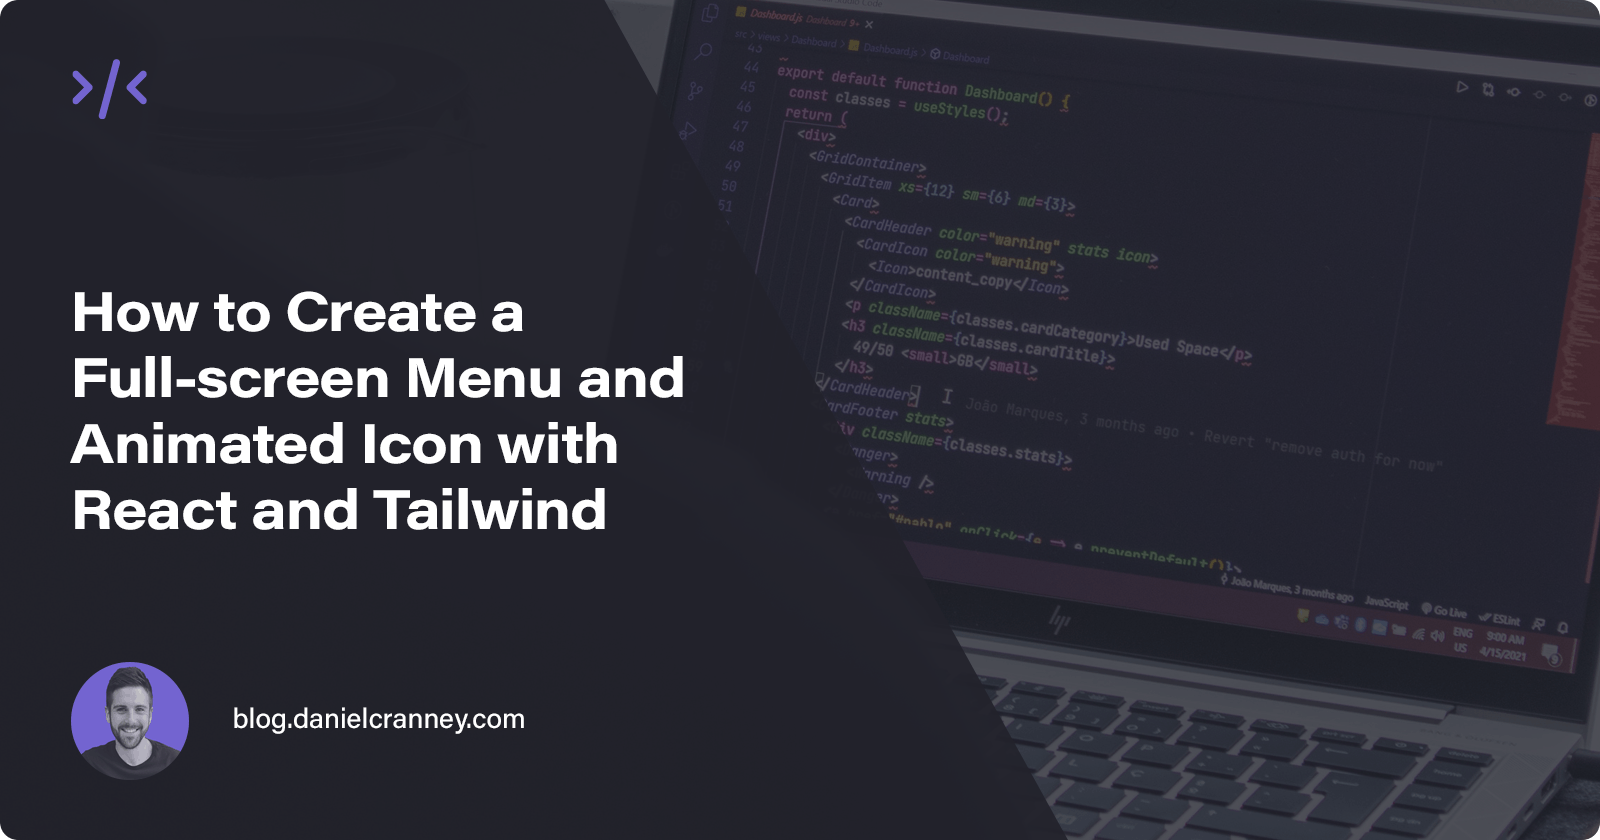 How to Create a Full-screen Menu and
Animated Icon with React and Tailwind